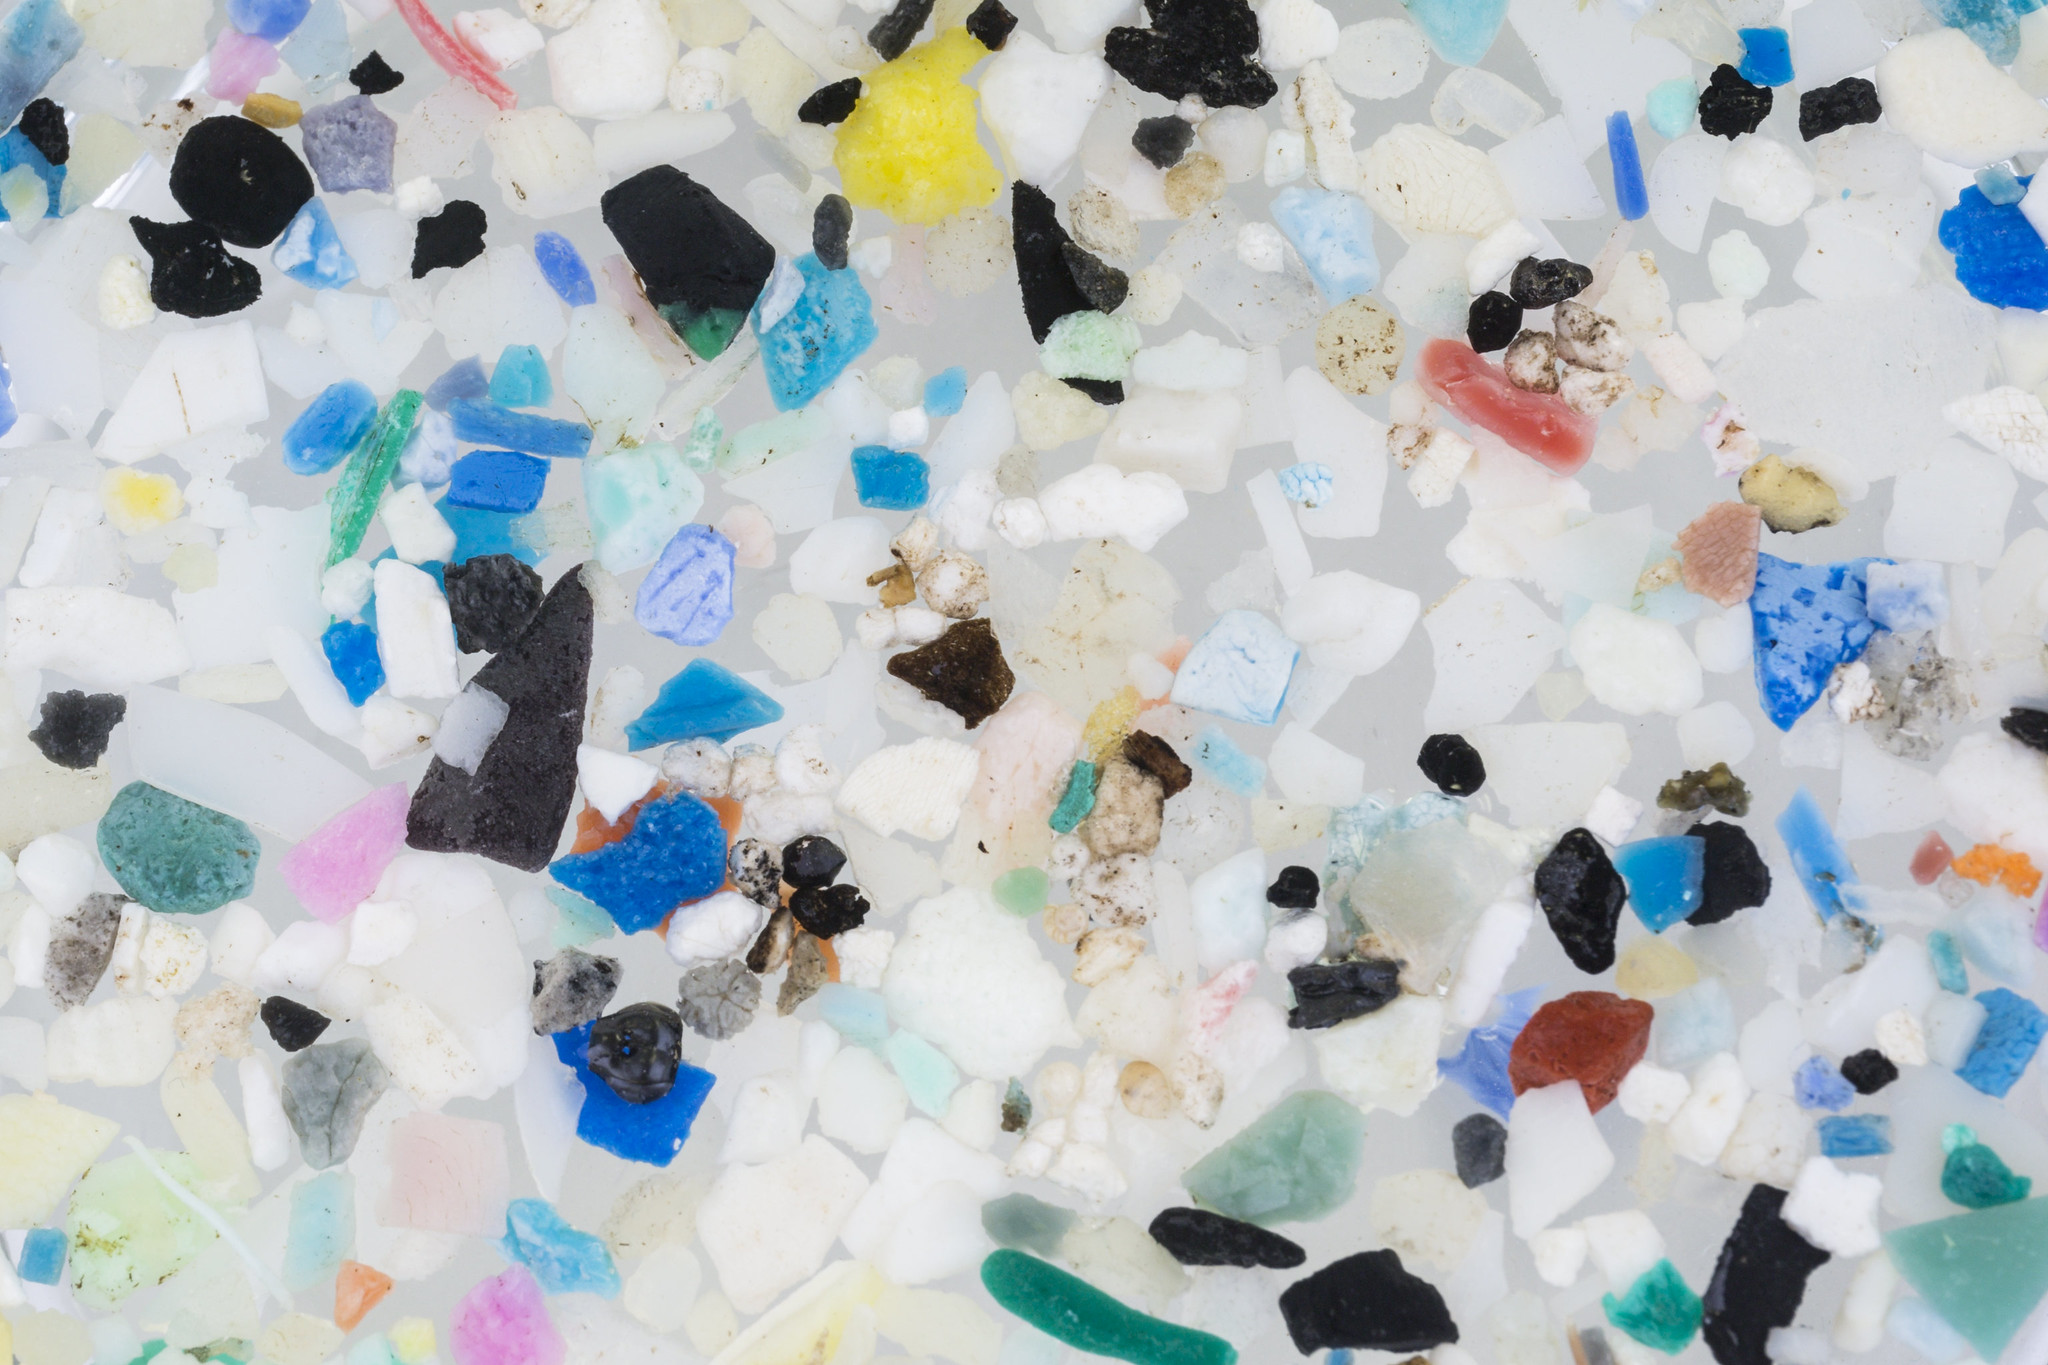 ‘Great concern’ as study finds microplastics in human placentas